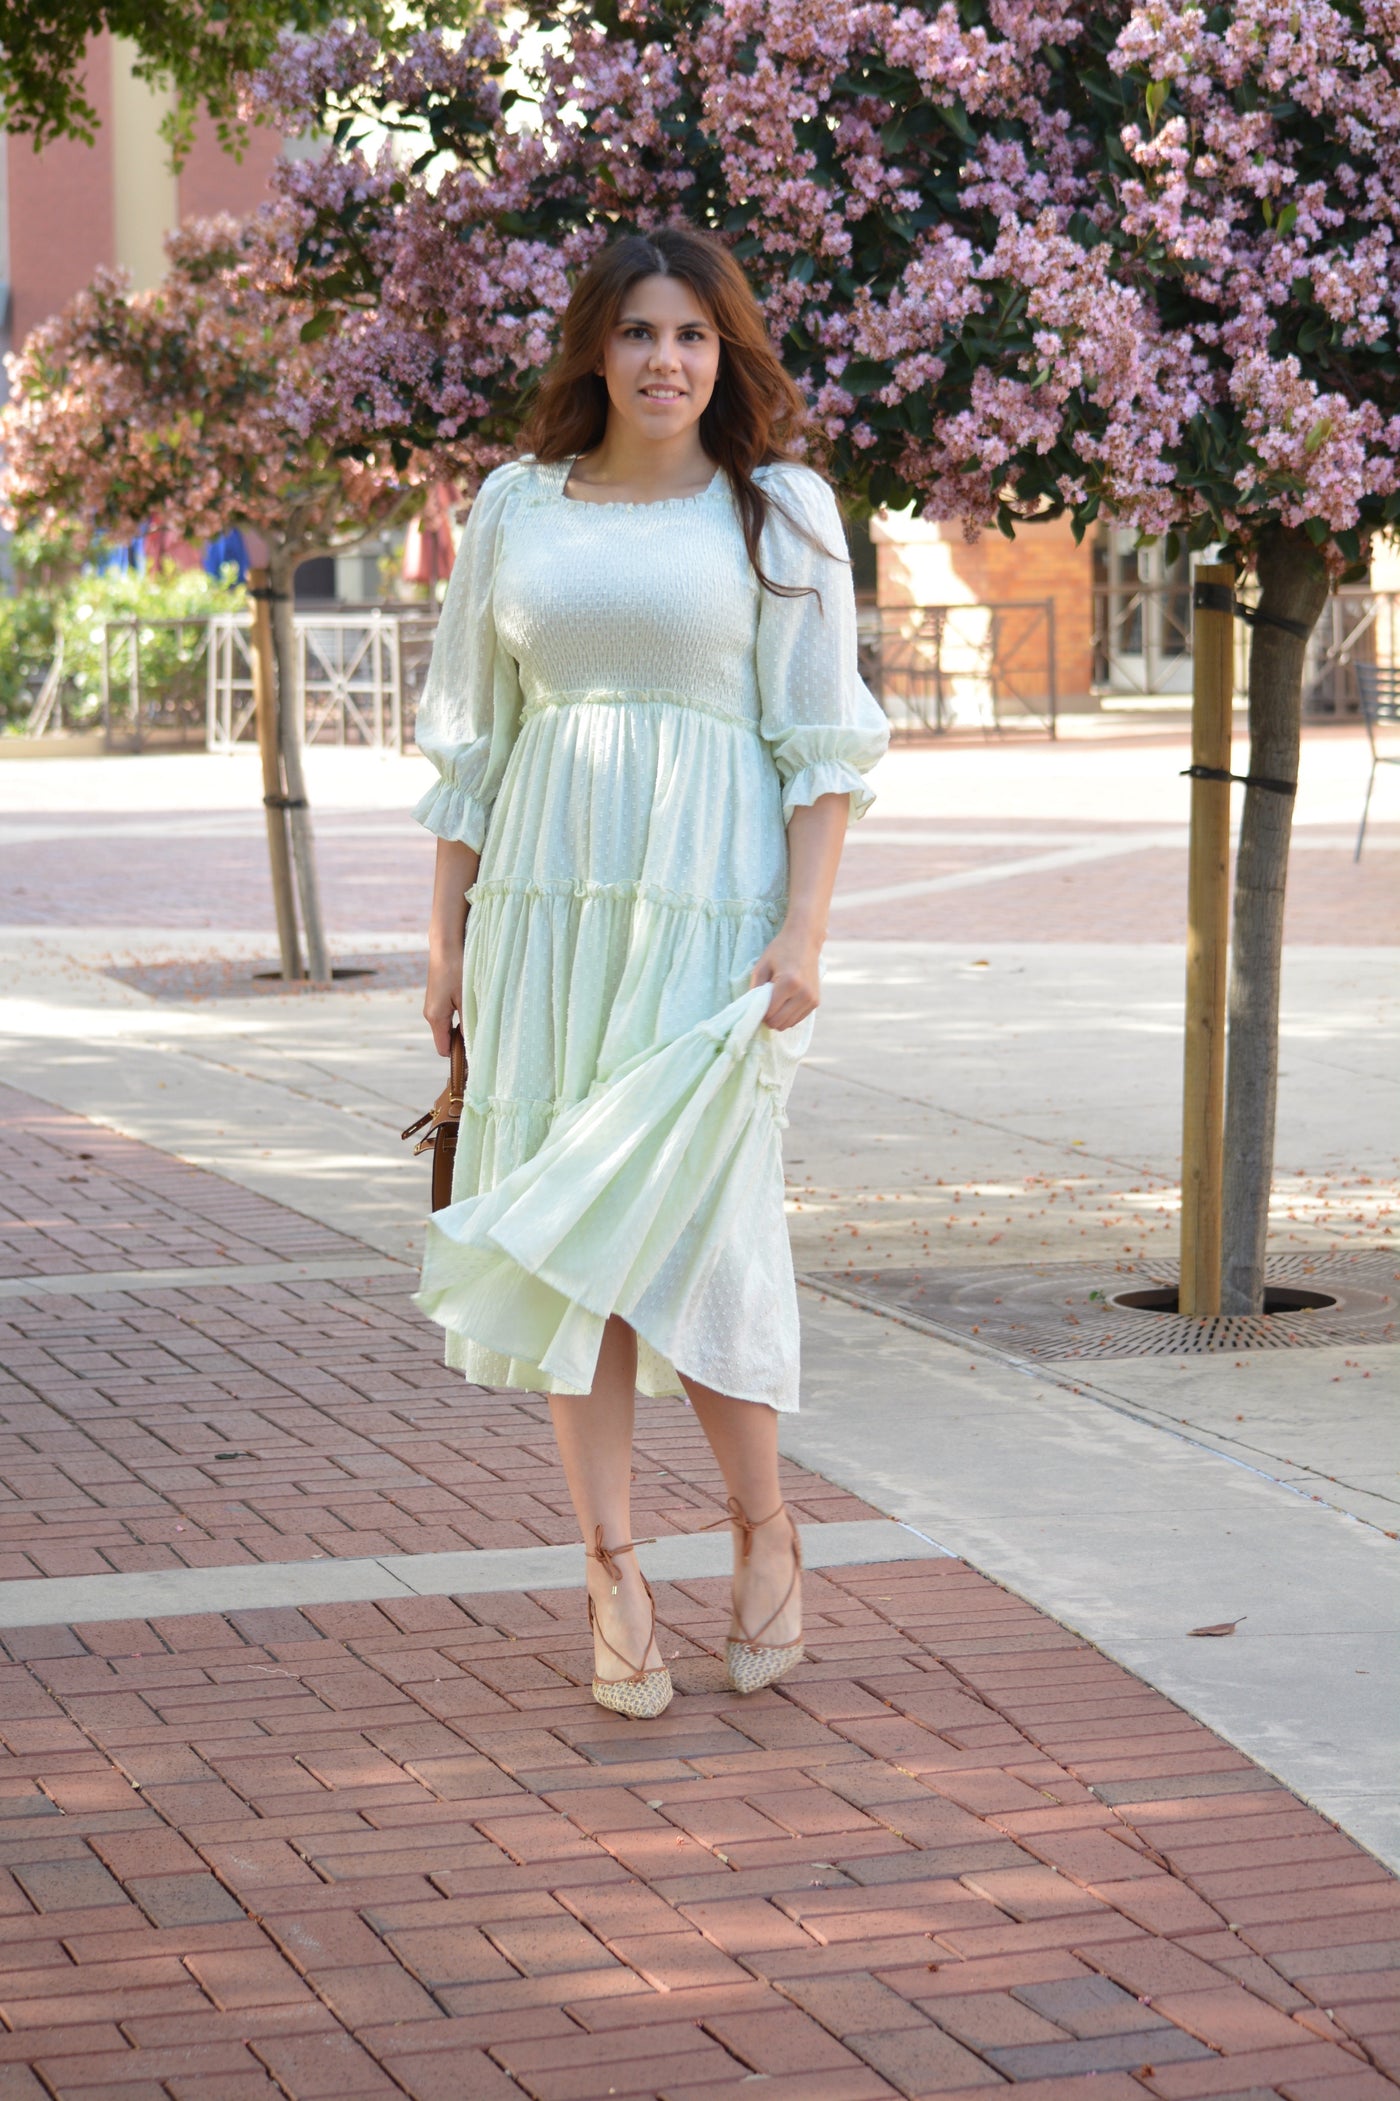 Briana Cotton Embroidered Mint Dress